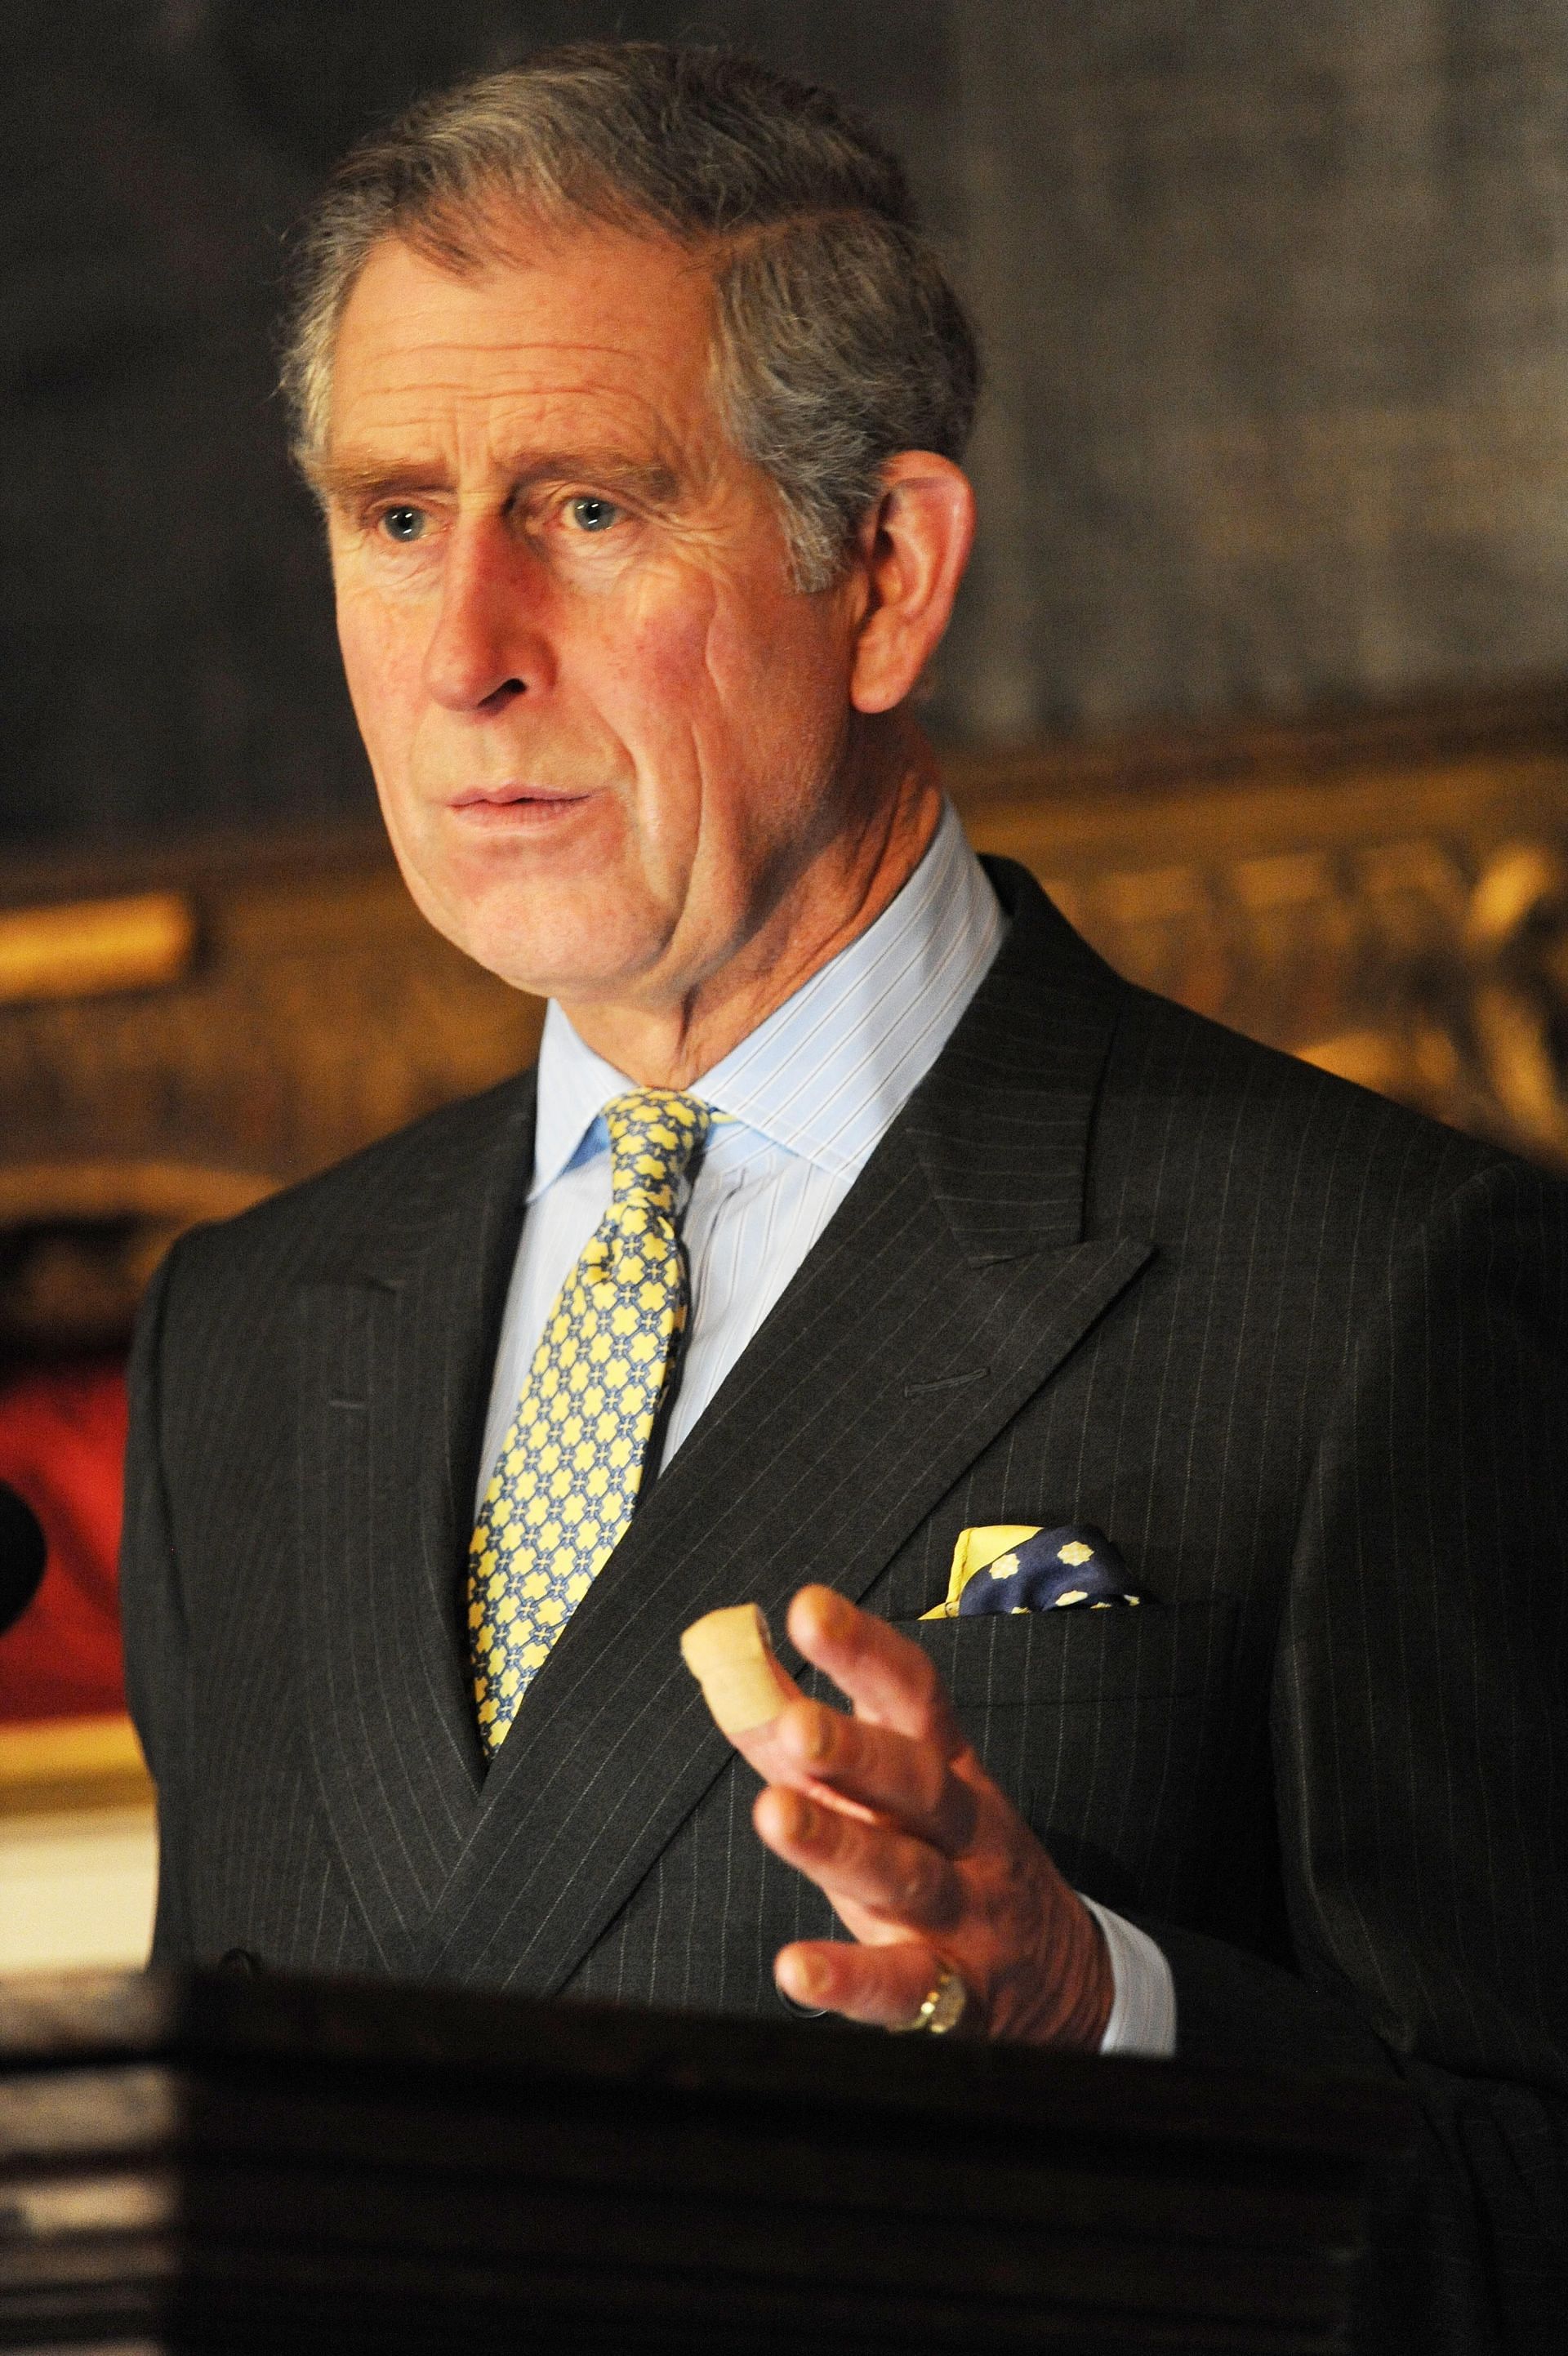 Prince Of Wales Speaks On Building Distinctive Places In Globalized World in 2008 (Image via Getty)